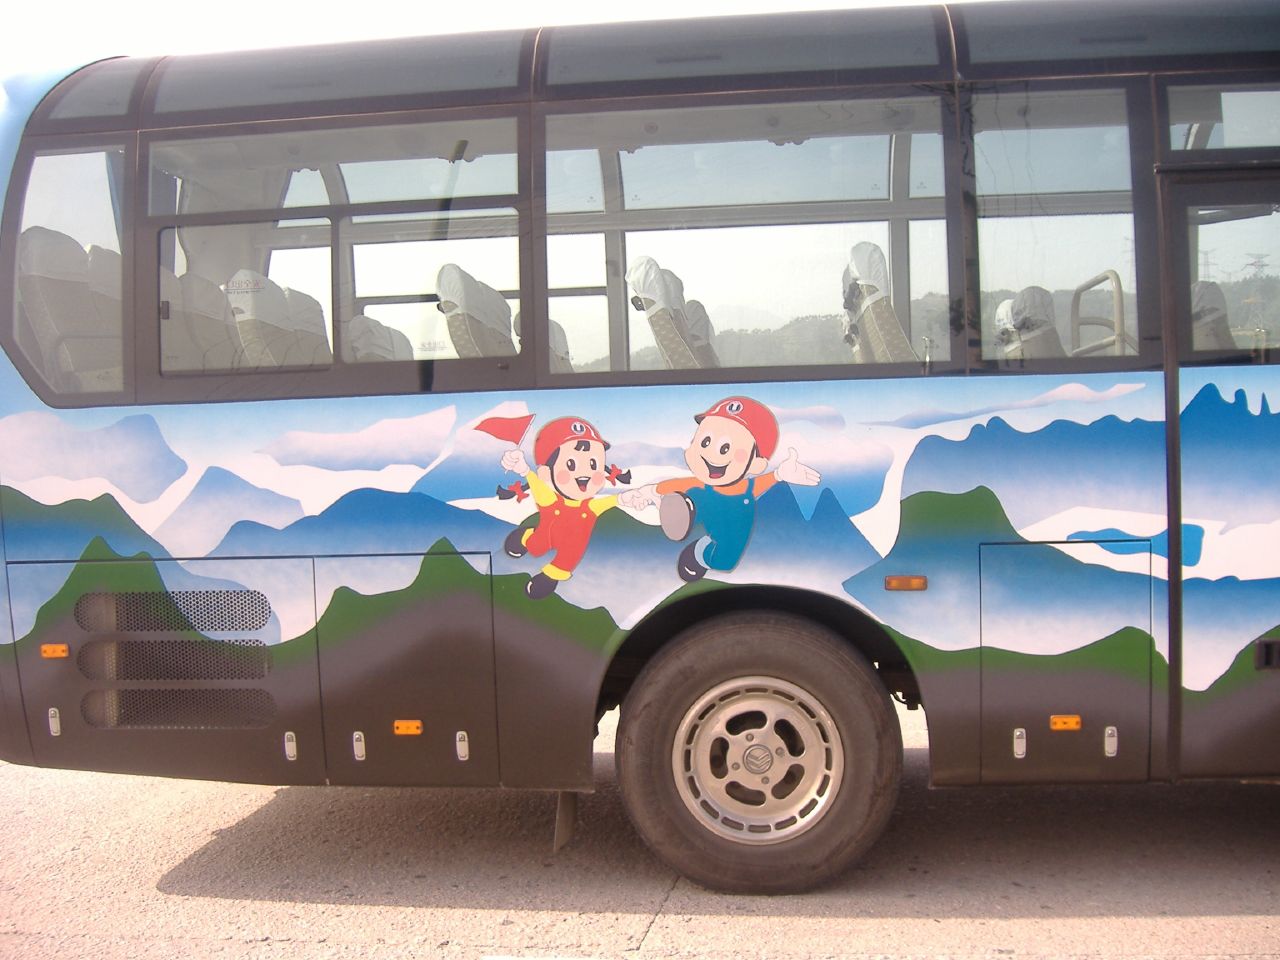 a large bus that has a painting on it